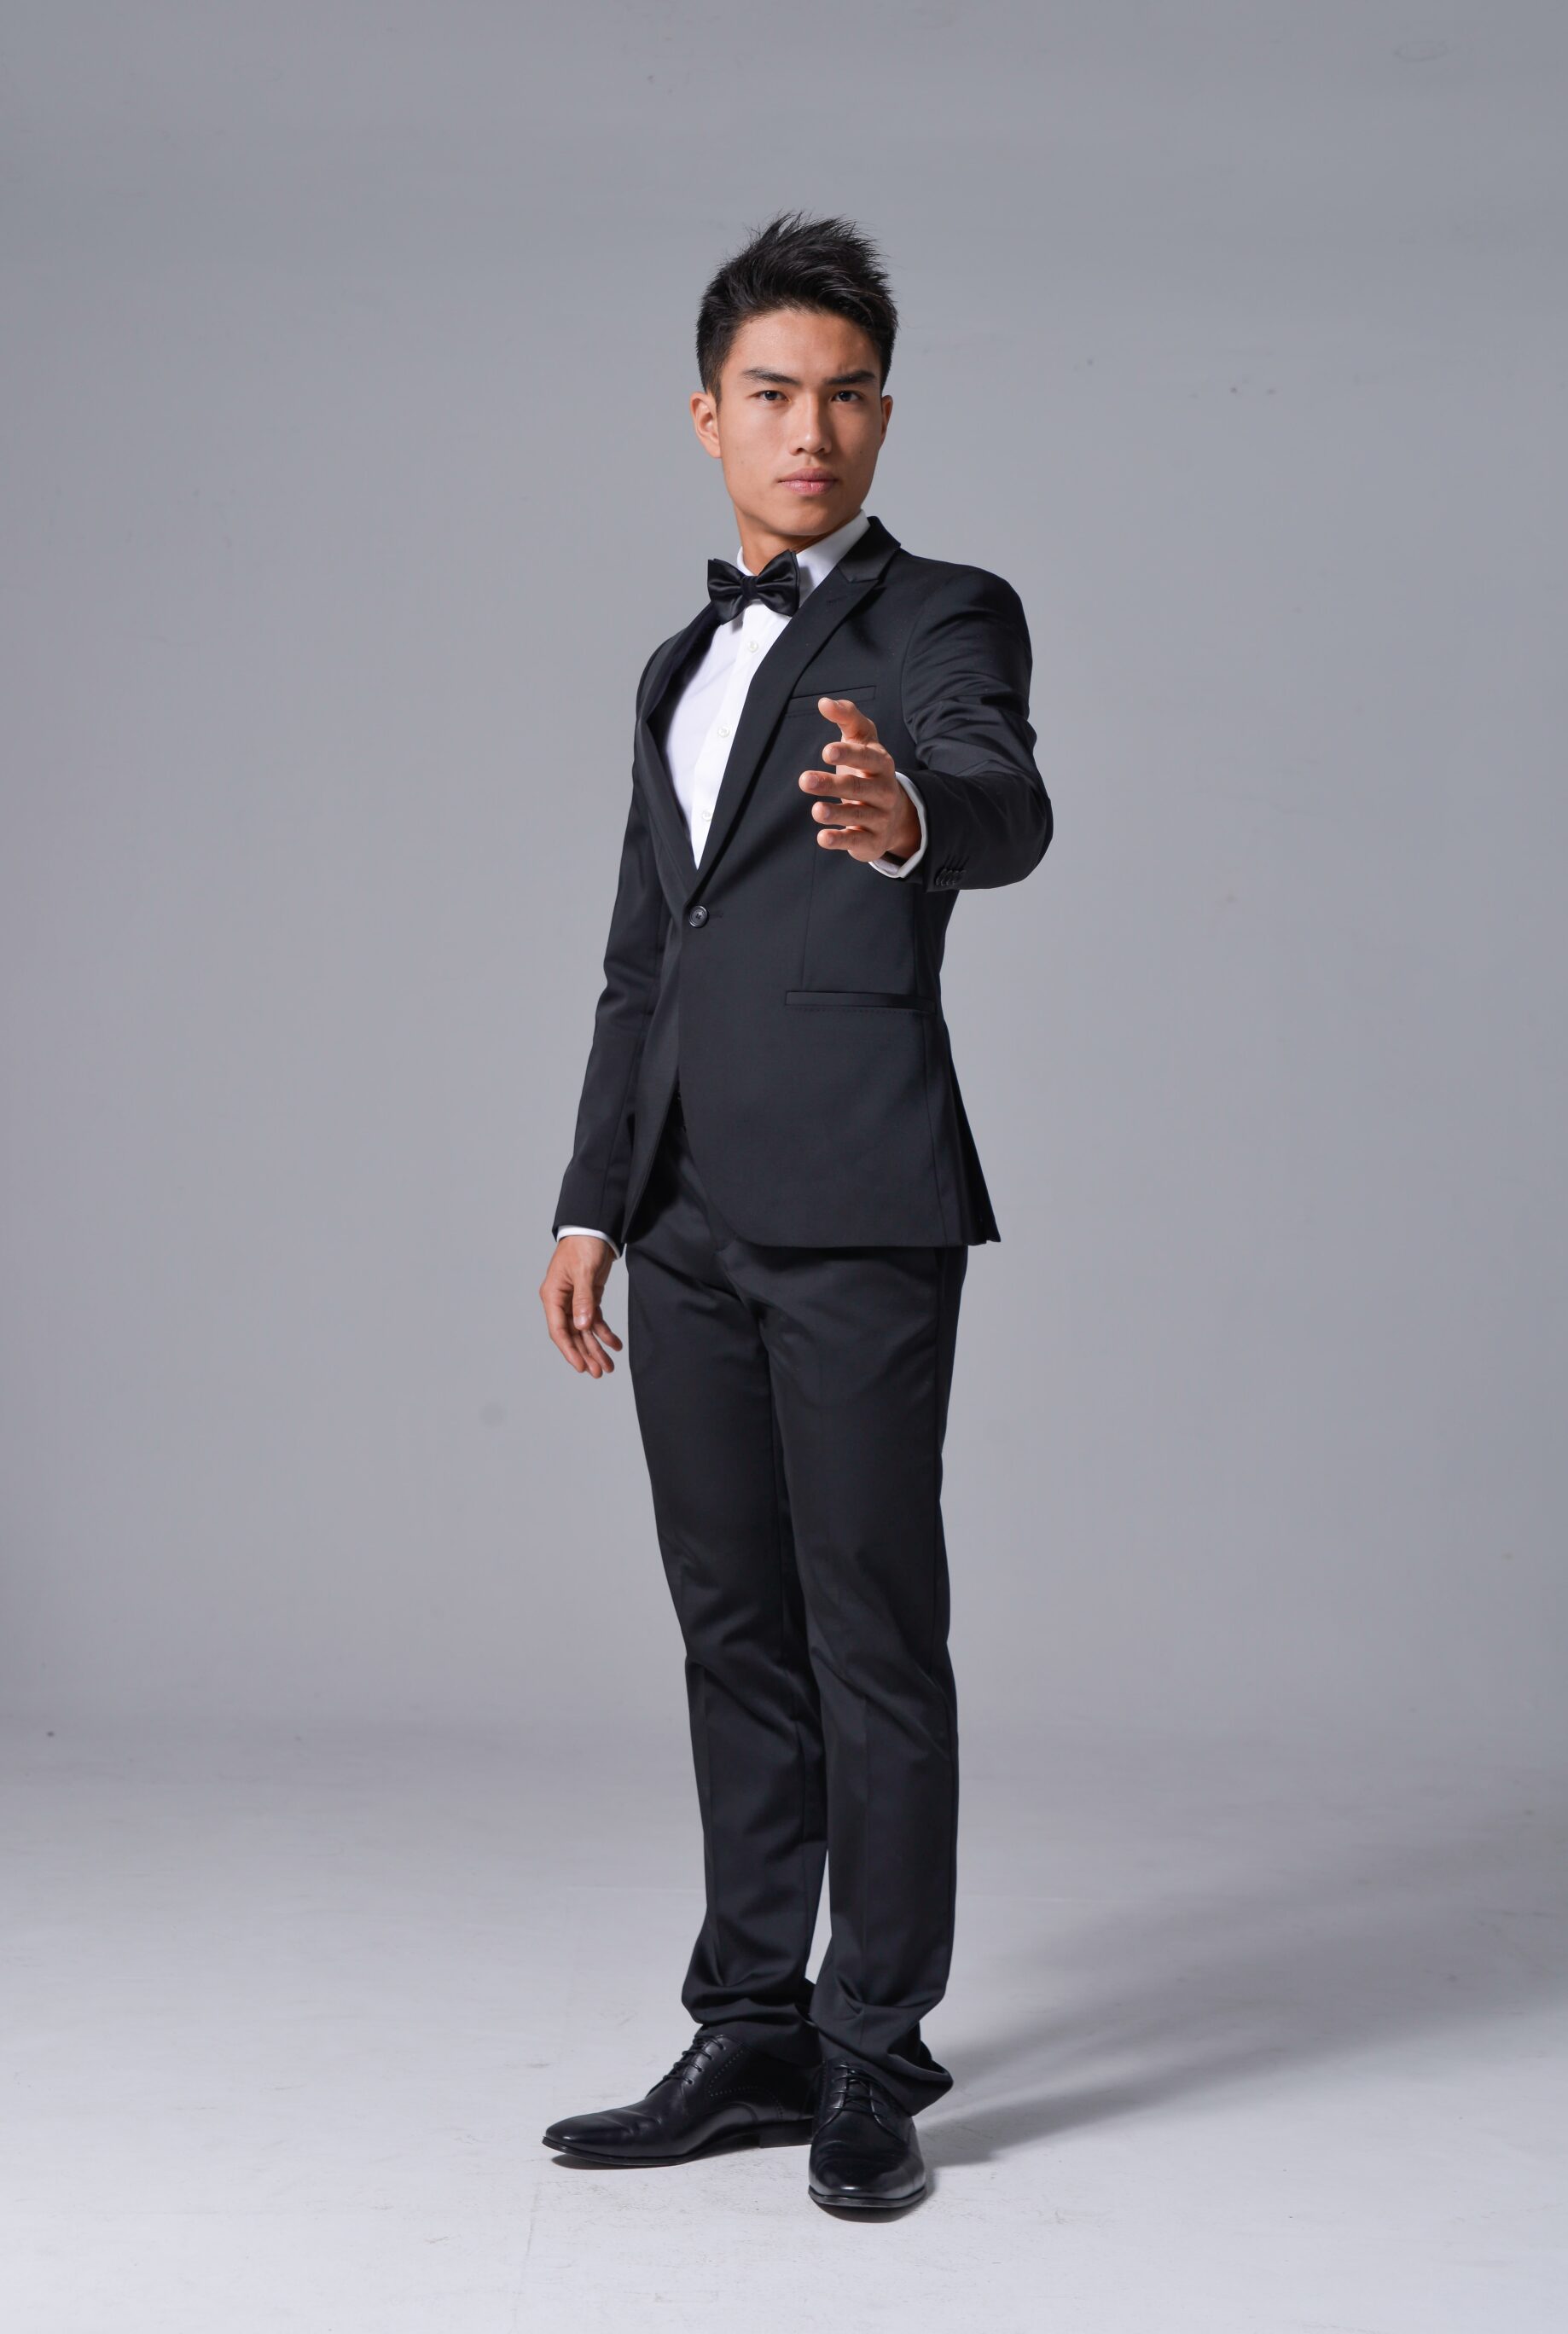 Formal Black Suit and Bow Tie